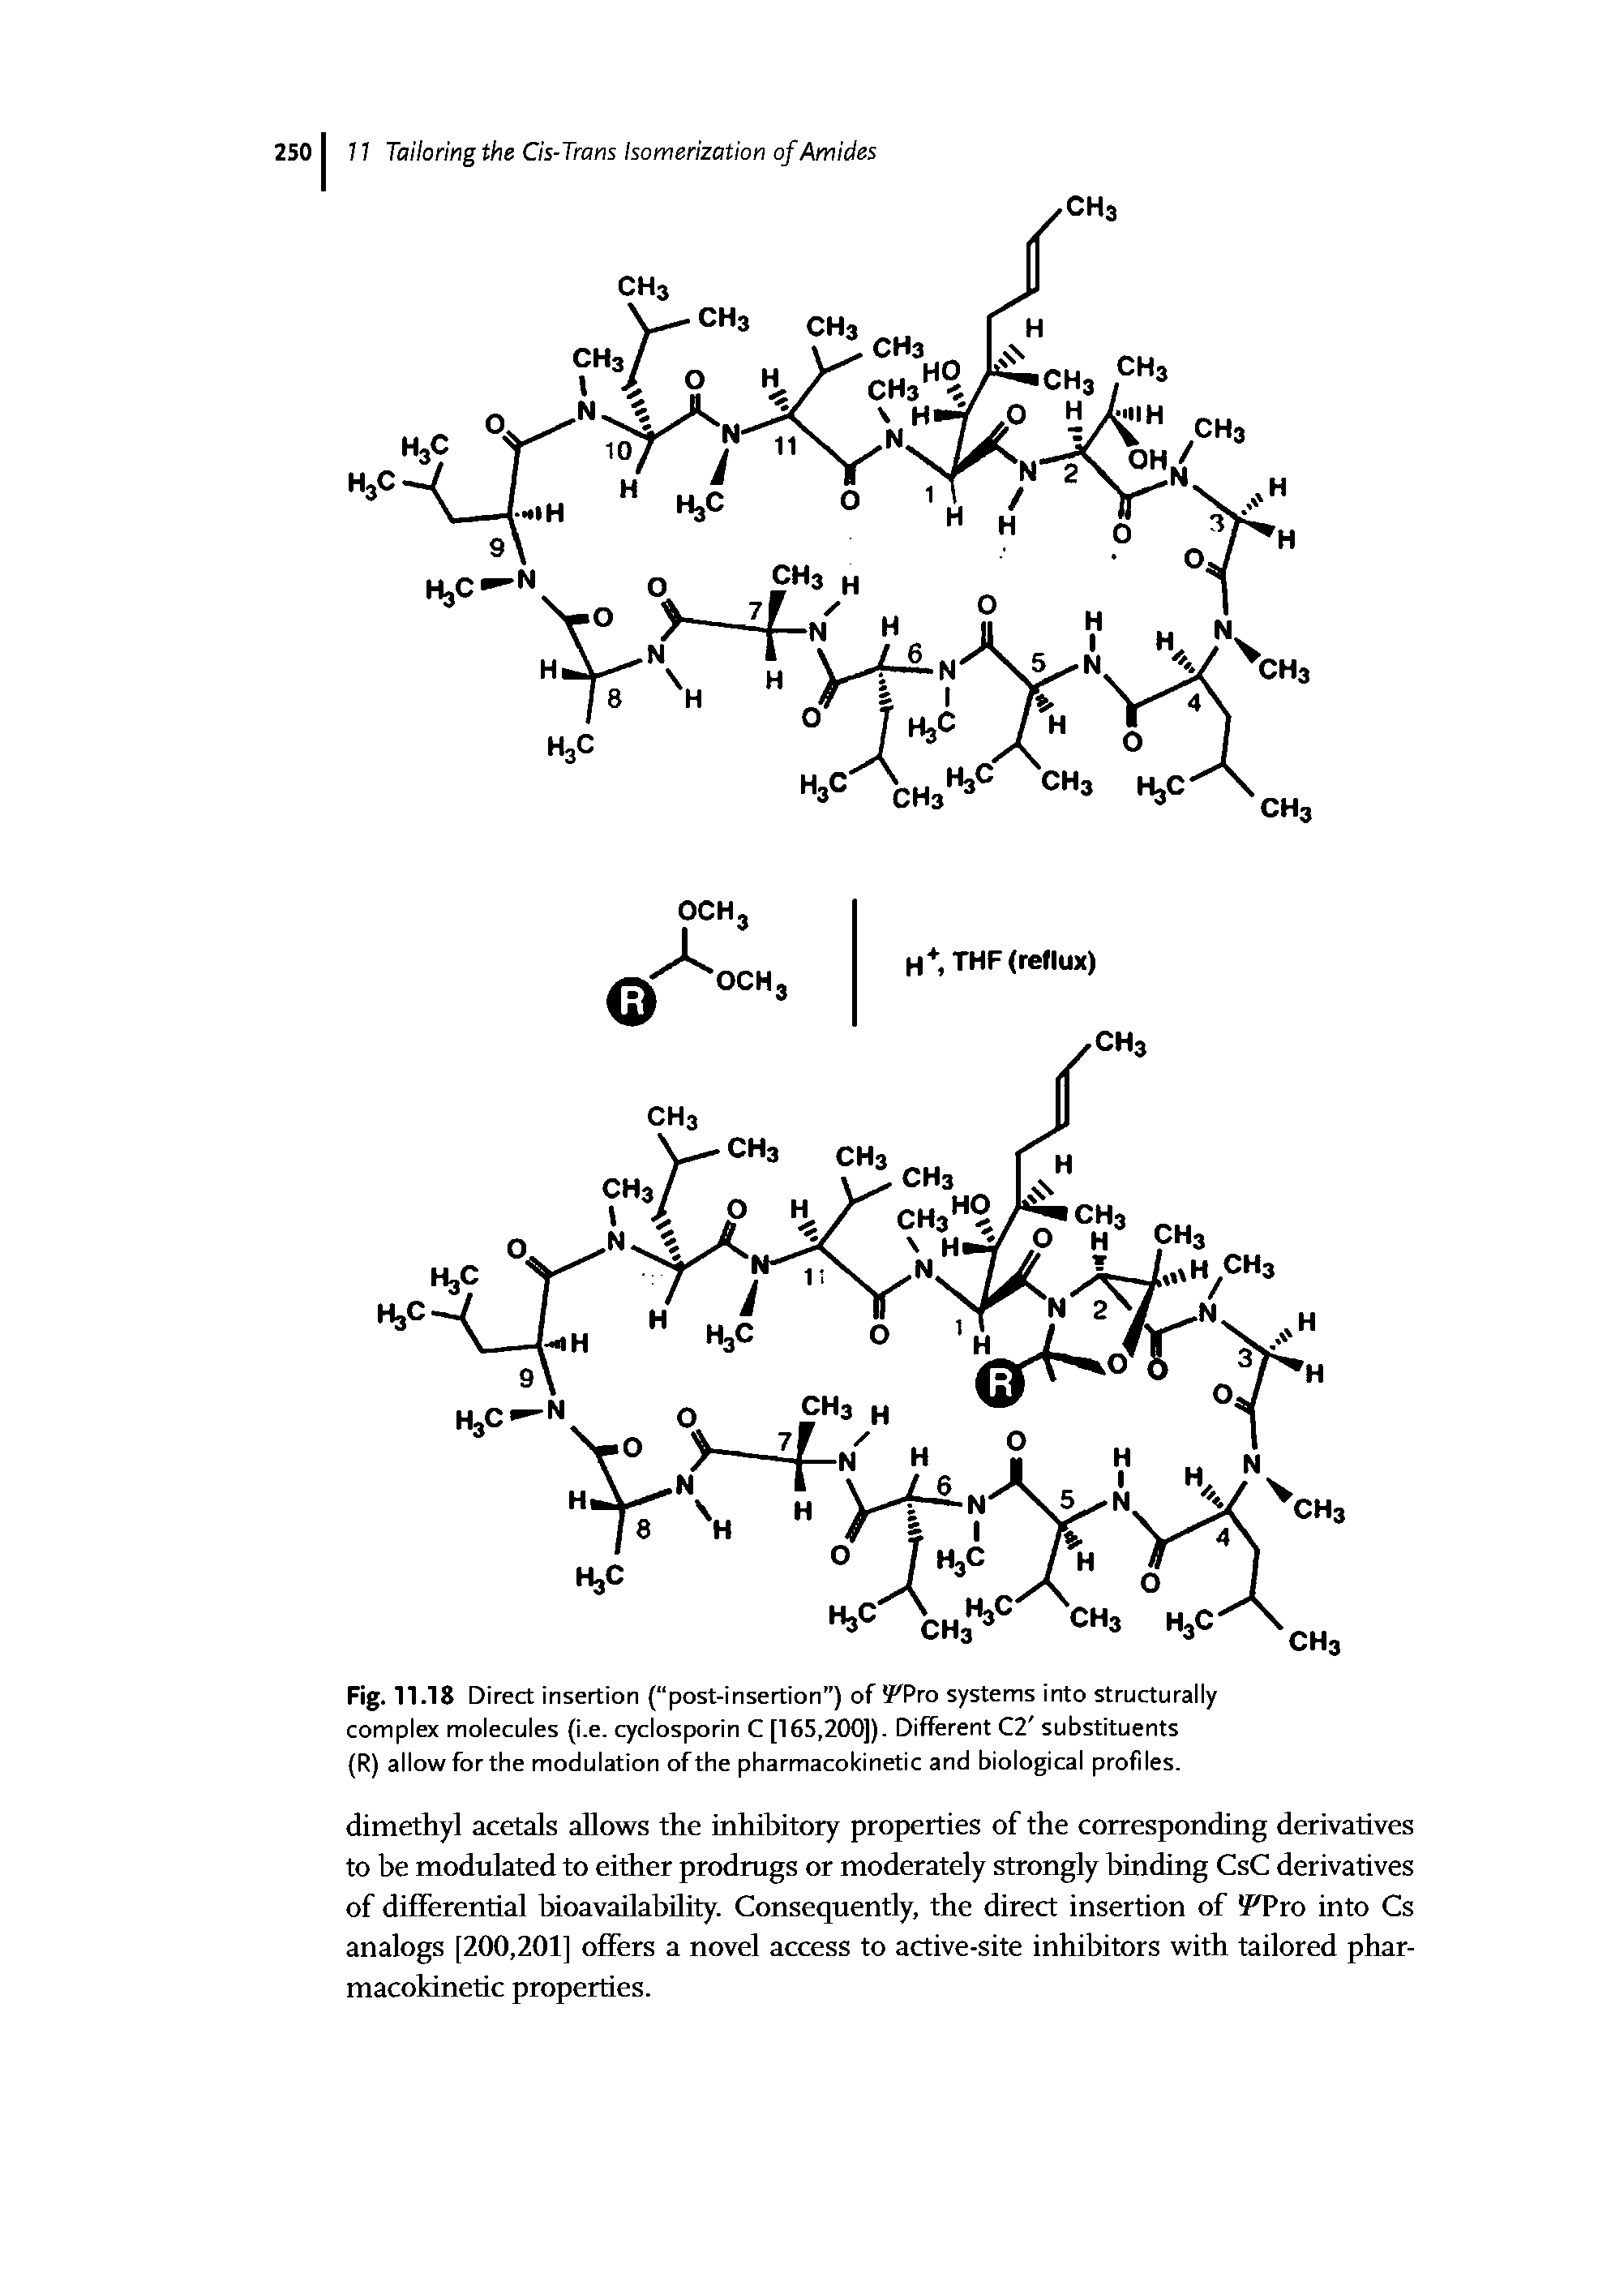 Fig. 11.18 Direct insertion ( post-insertion ) of VPm systems into structurally complex molecules (i.e. cyclosporin C [165,200]). Different C2 substituents (R) allow forthe modulation of the pharmacokinetic and biological profiles.